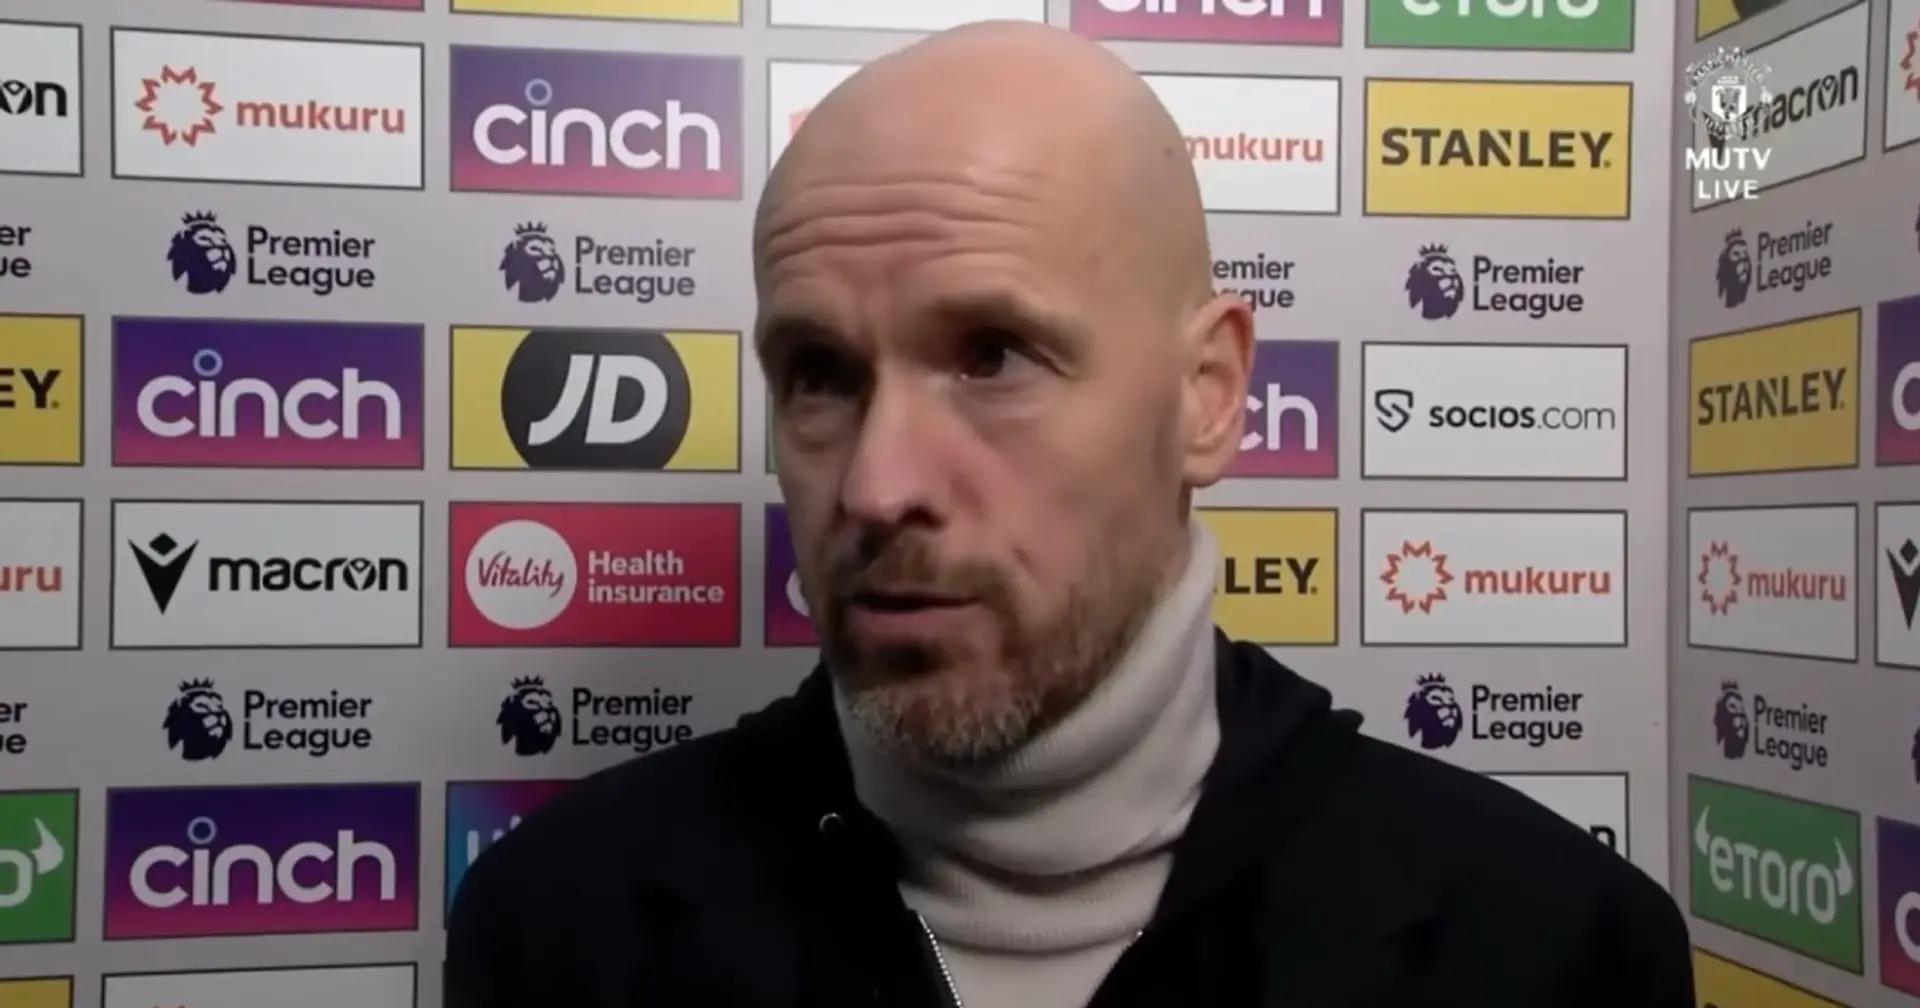 Erik ten Hag: 'We dropped 2 points. I have to criticise my team'